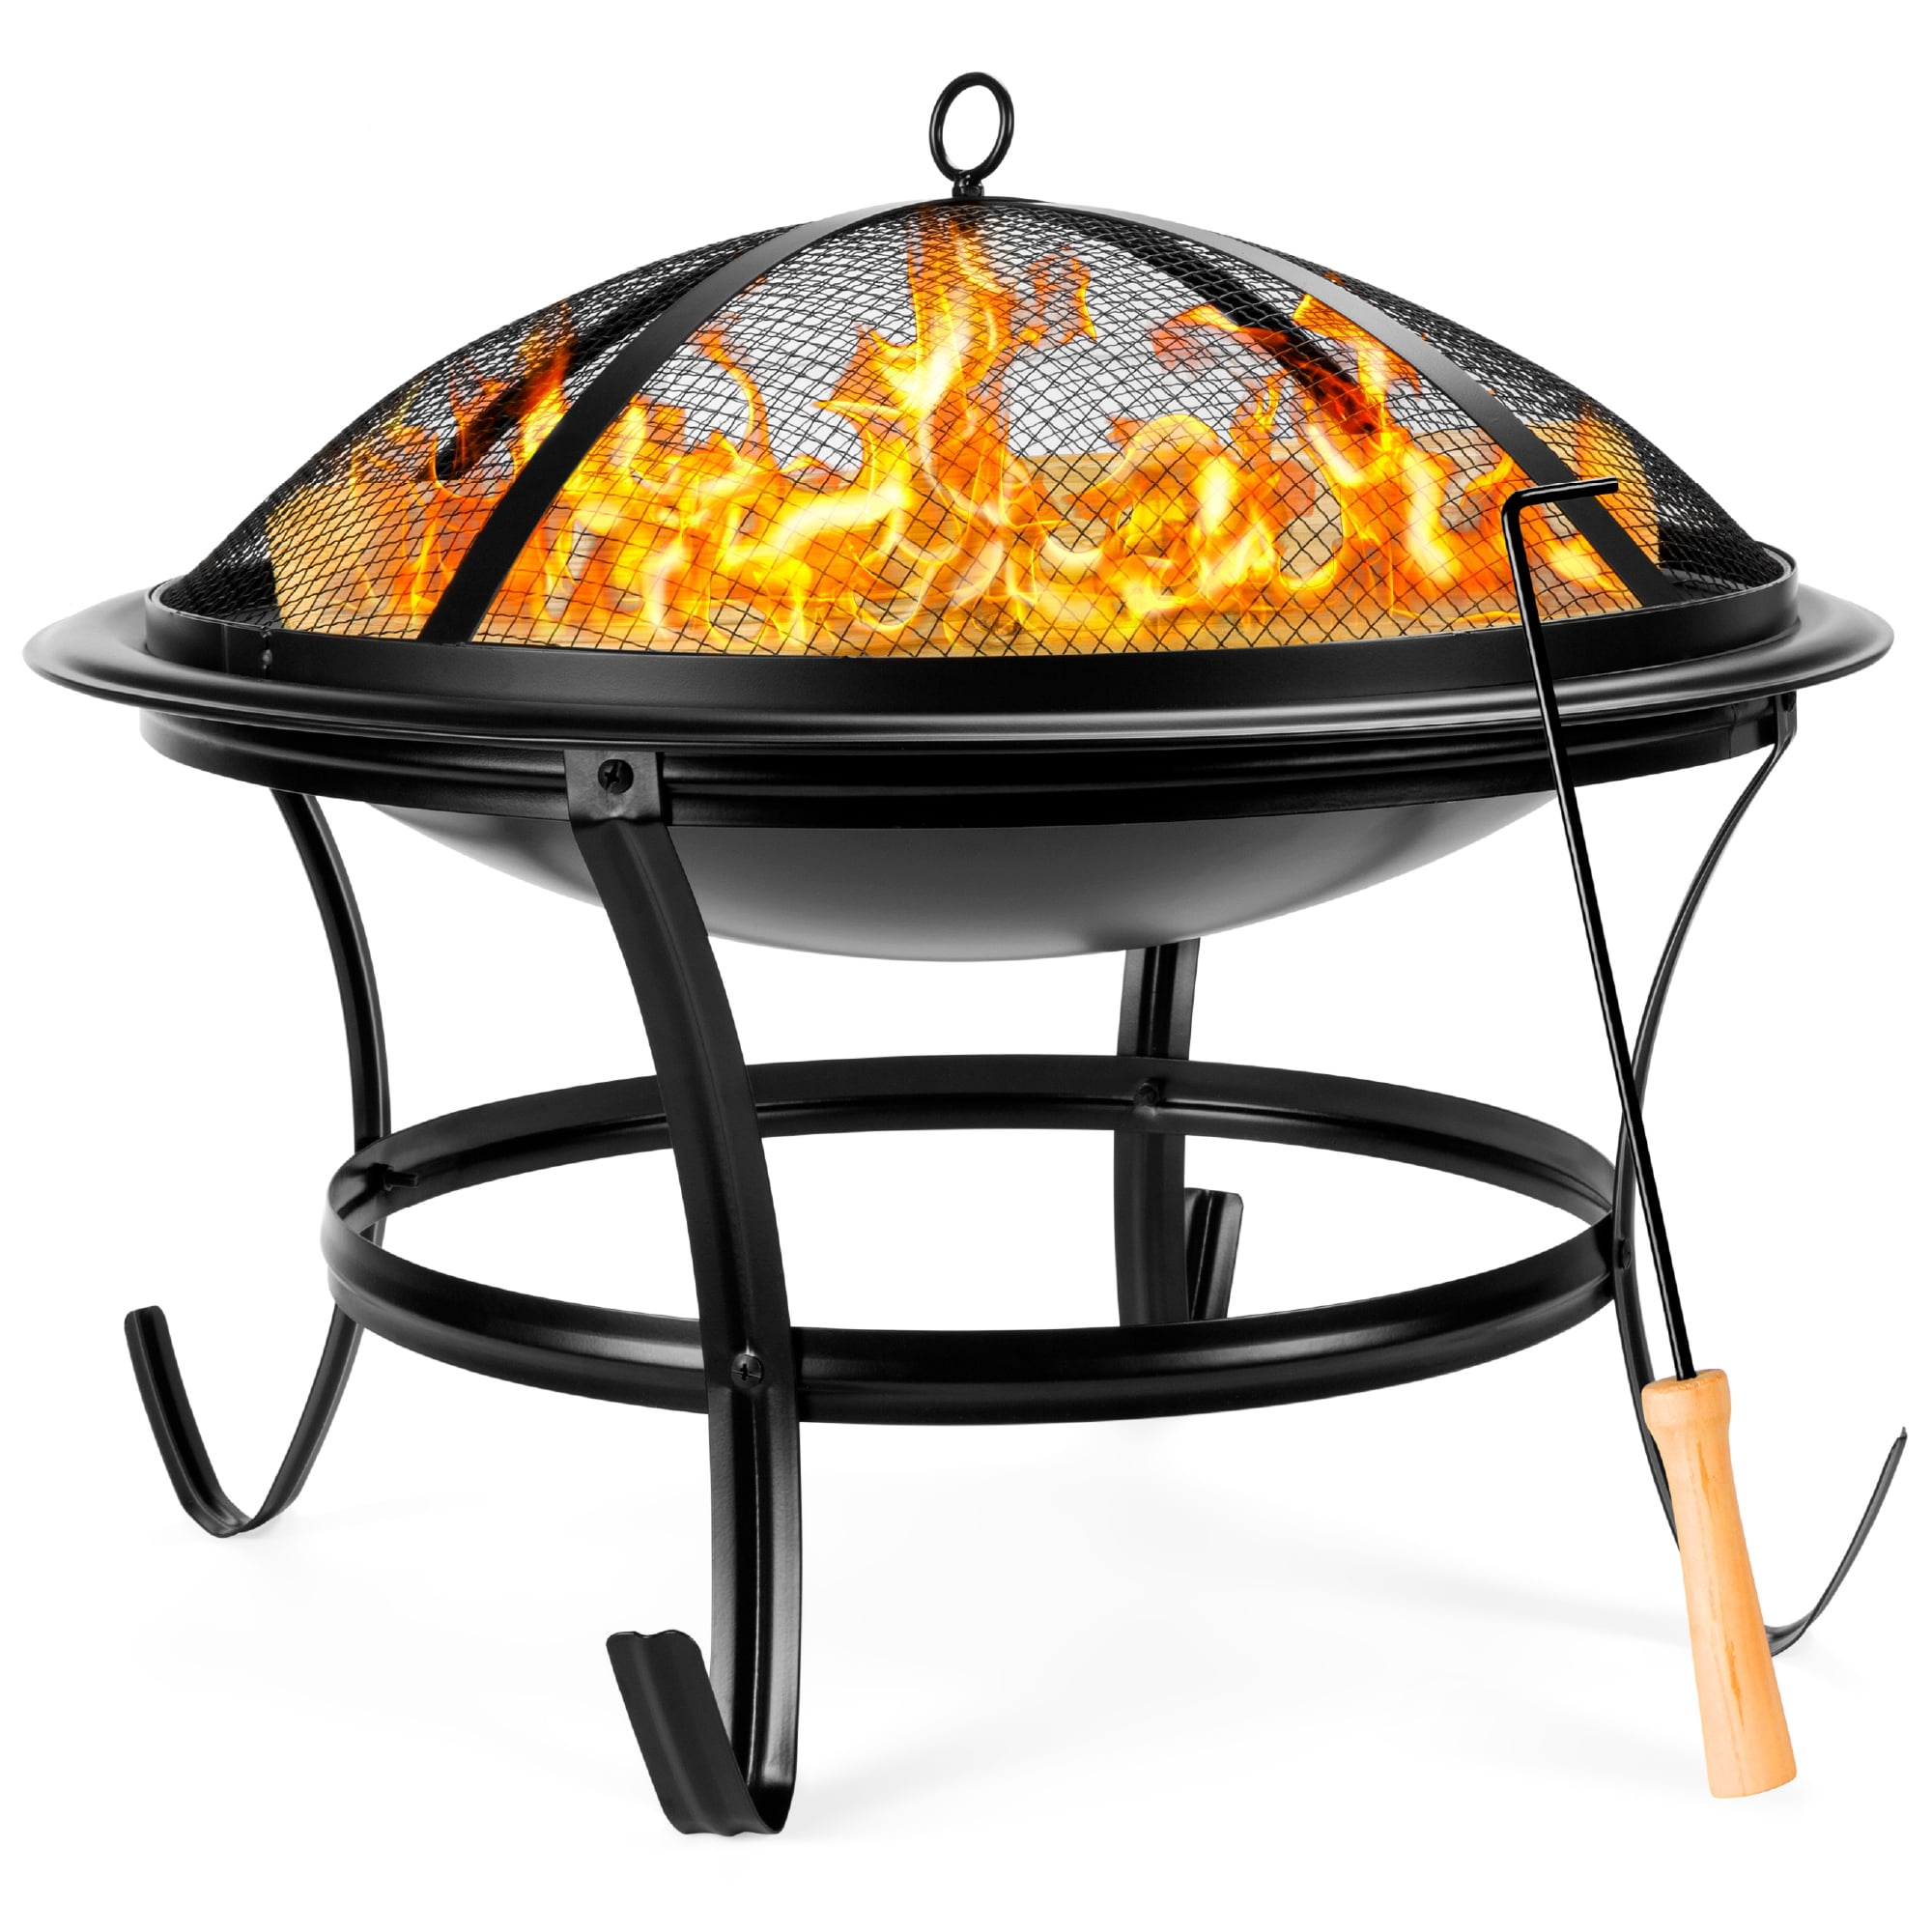 22" Outdoor Burning Fire Pit Bowl BBQ Grill Backyard Patio Stove Fireplace 